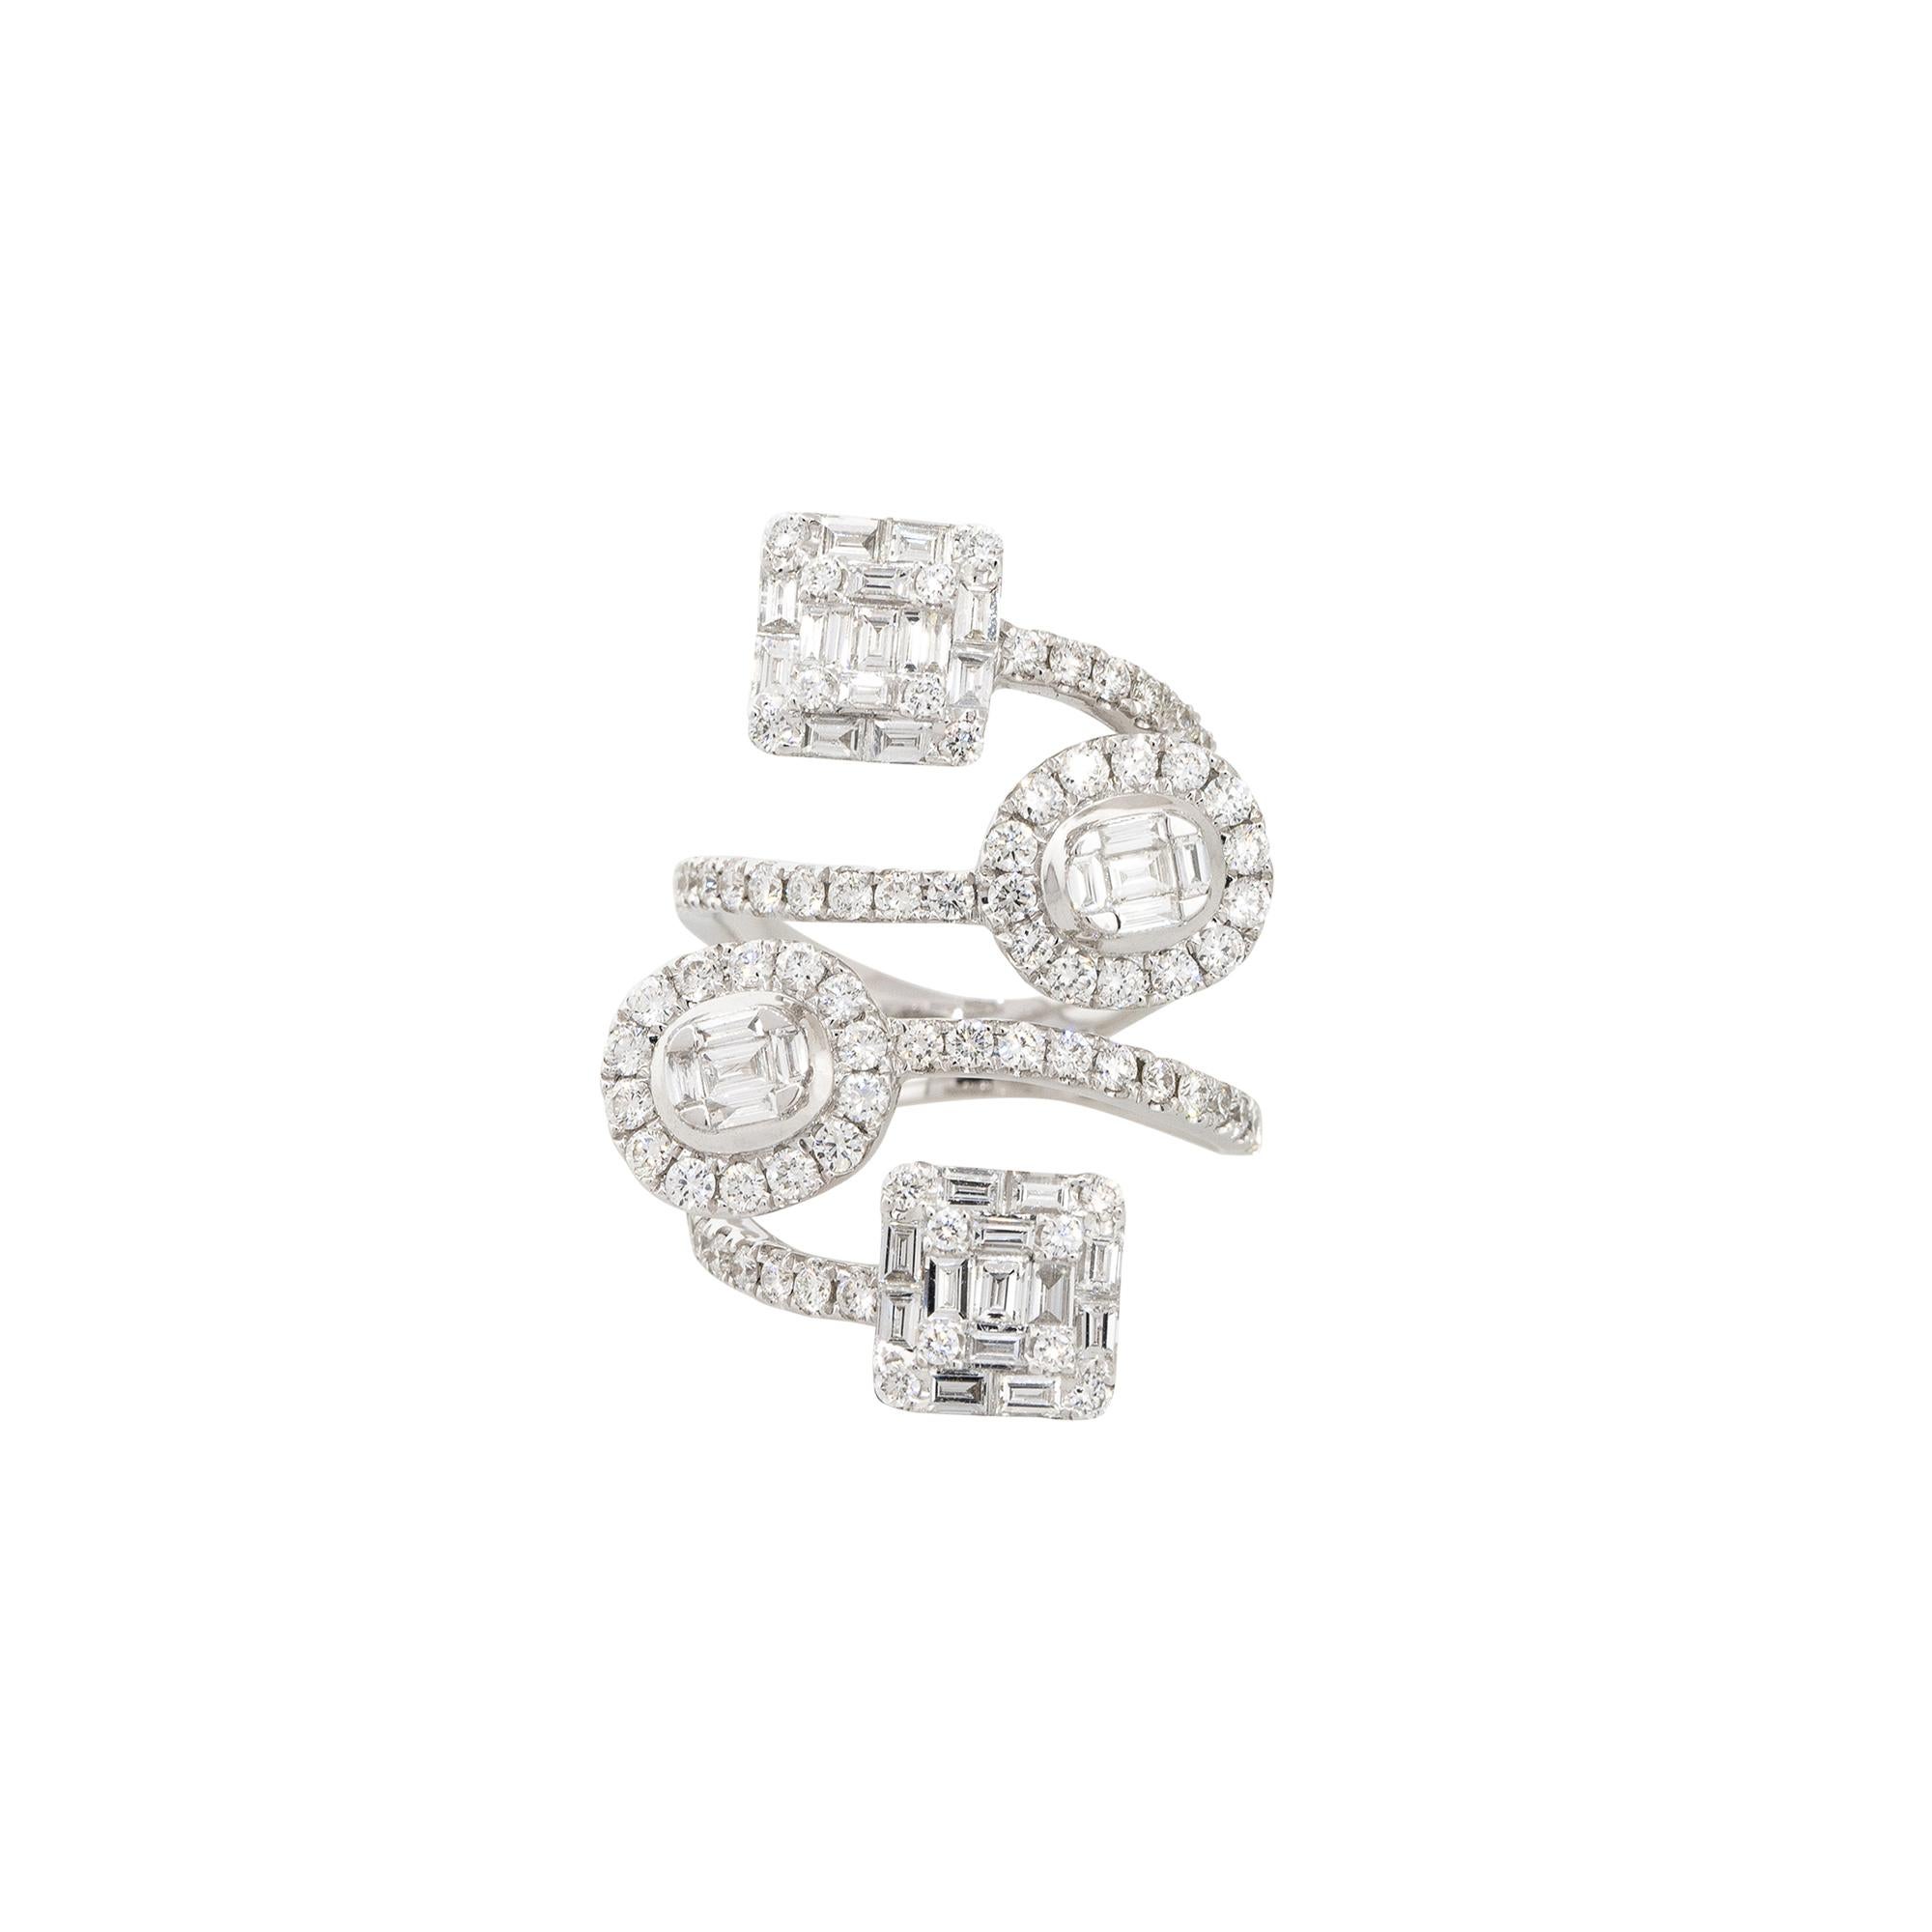 18k White Gold 2.5ctw Diamond Mosaic Station Crossover Ring
Style: Women's Diamond Crossover Ring
Material: 18k White Gold
Main Diamond Details: Approximately 2.5ctw of Round Brilliant and Baguette cut Diamonds. There are 4 mosaic Diamond stations;